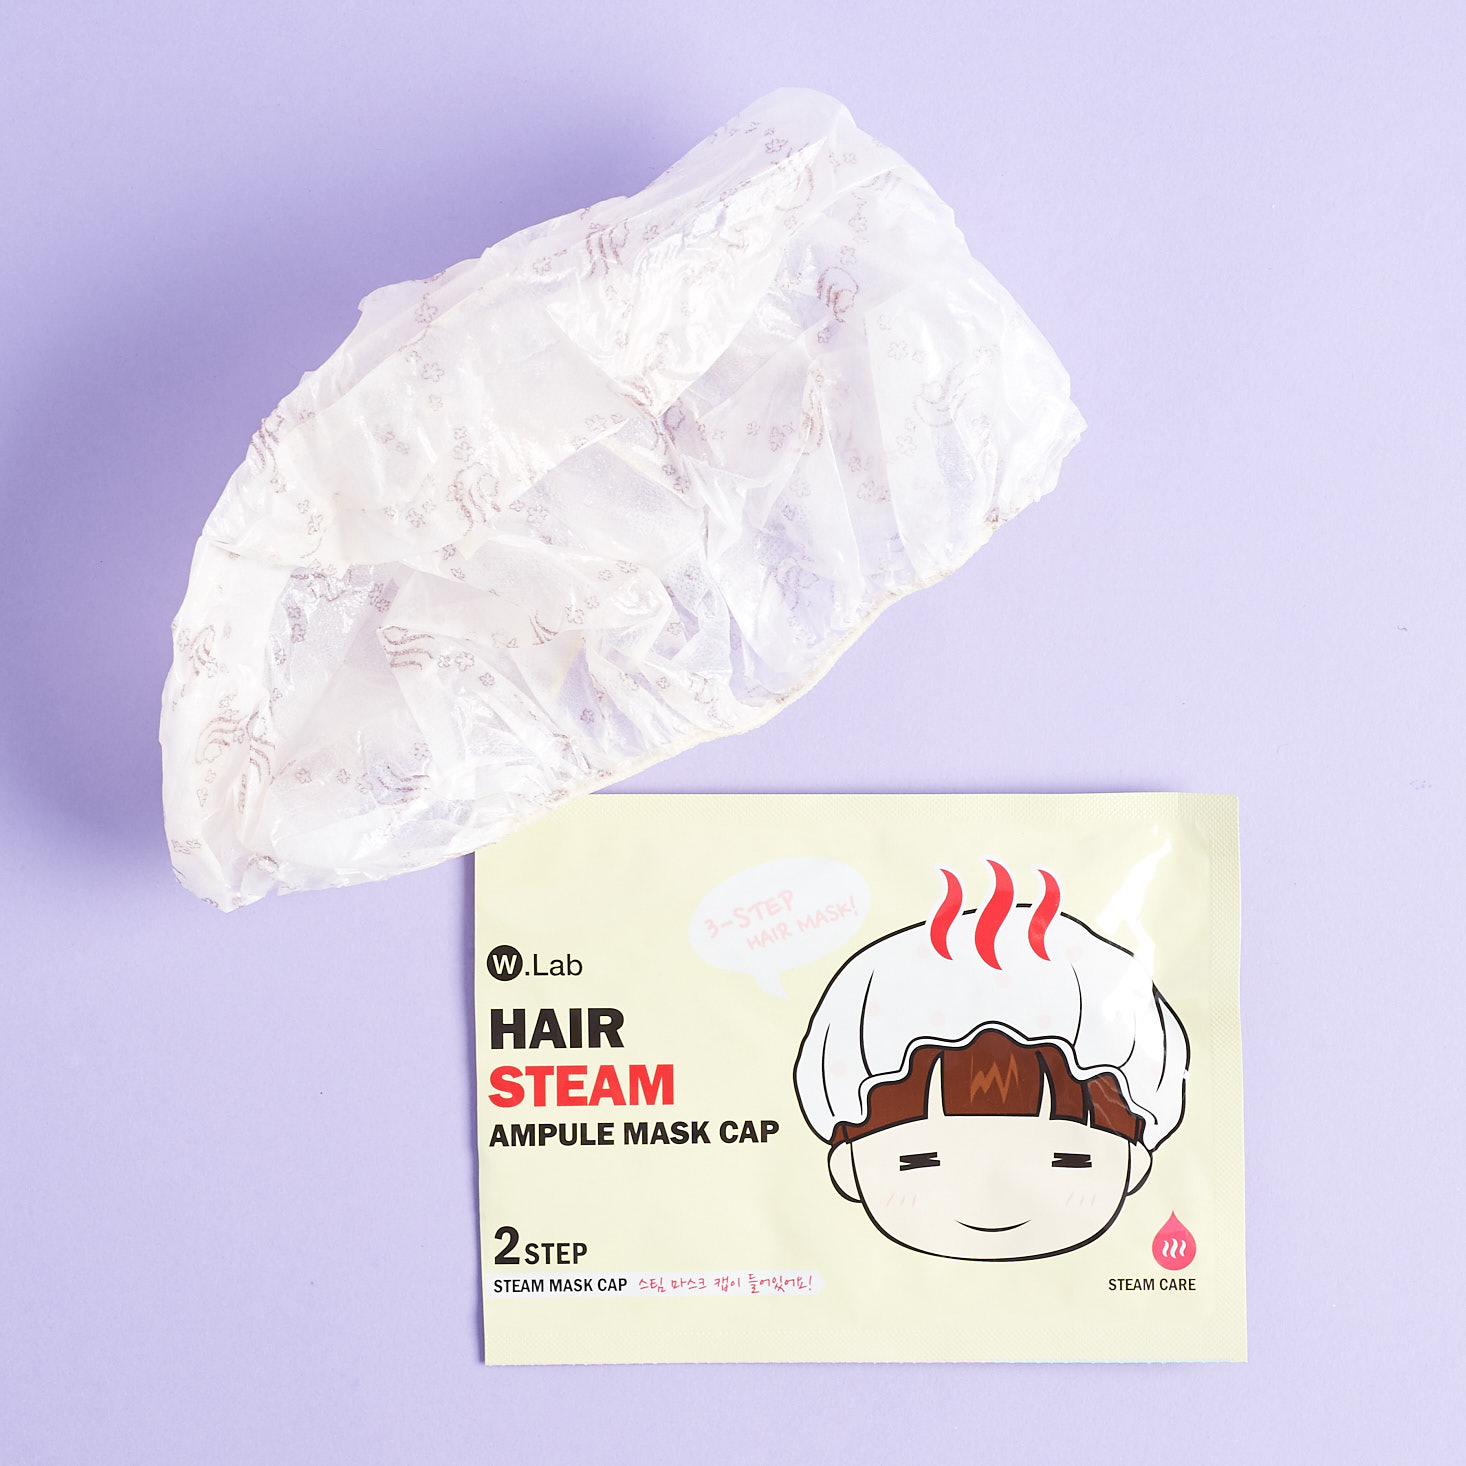 mask from W. Lab Haair Steam Ampule Mask Cap